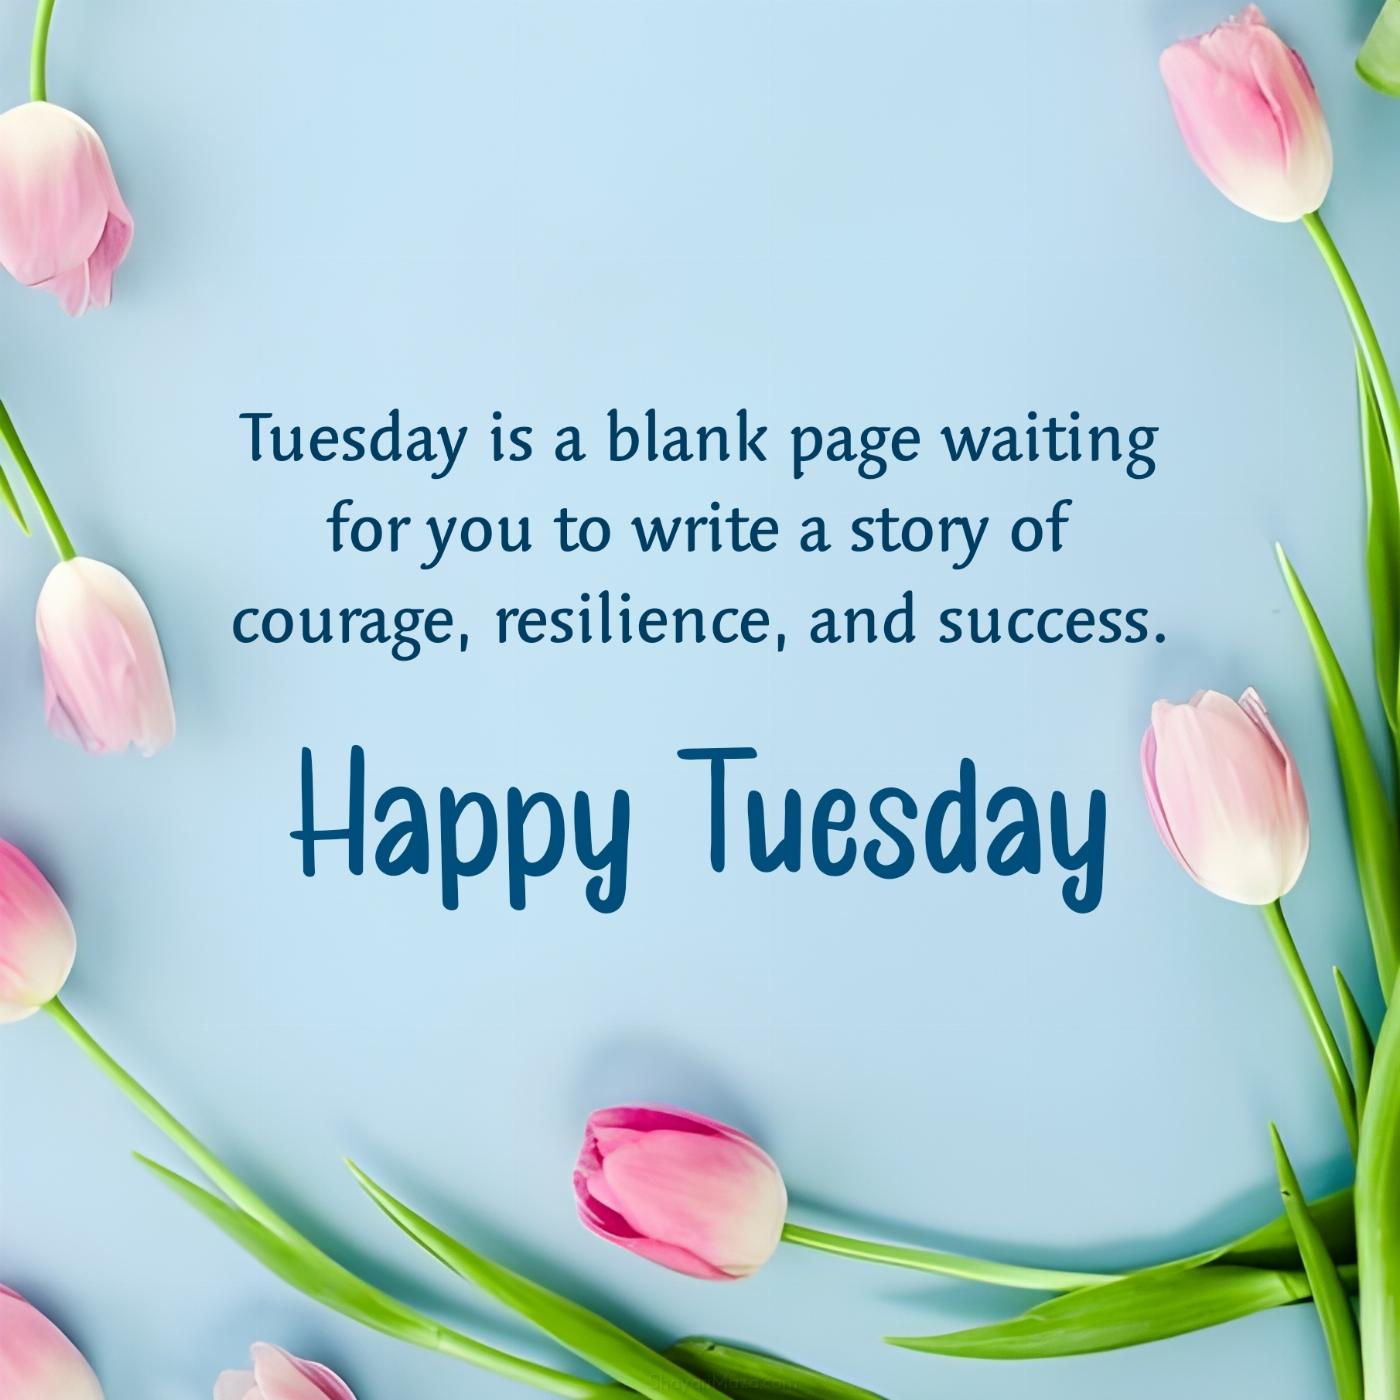 Tuesday is a blank page waiting for you to write a story of courage